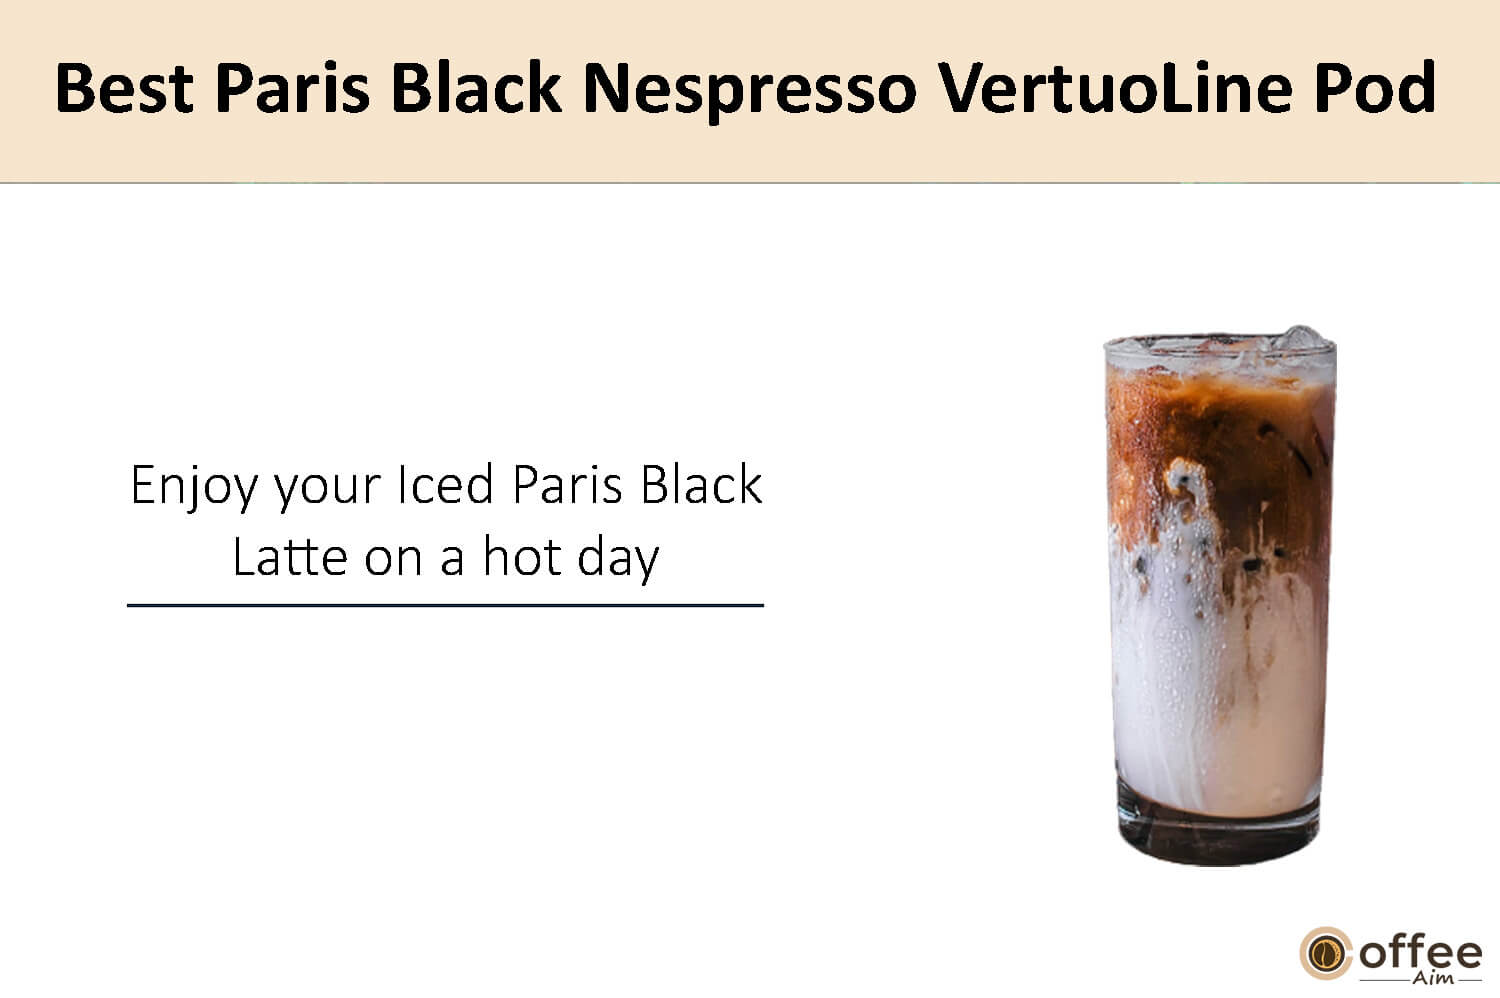 In this image, I elucidate the preparation instructions for crafting the finest Nespresso Paris Black Vertuo coffee pod.